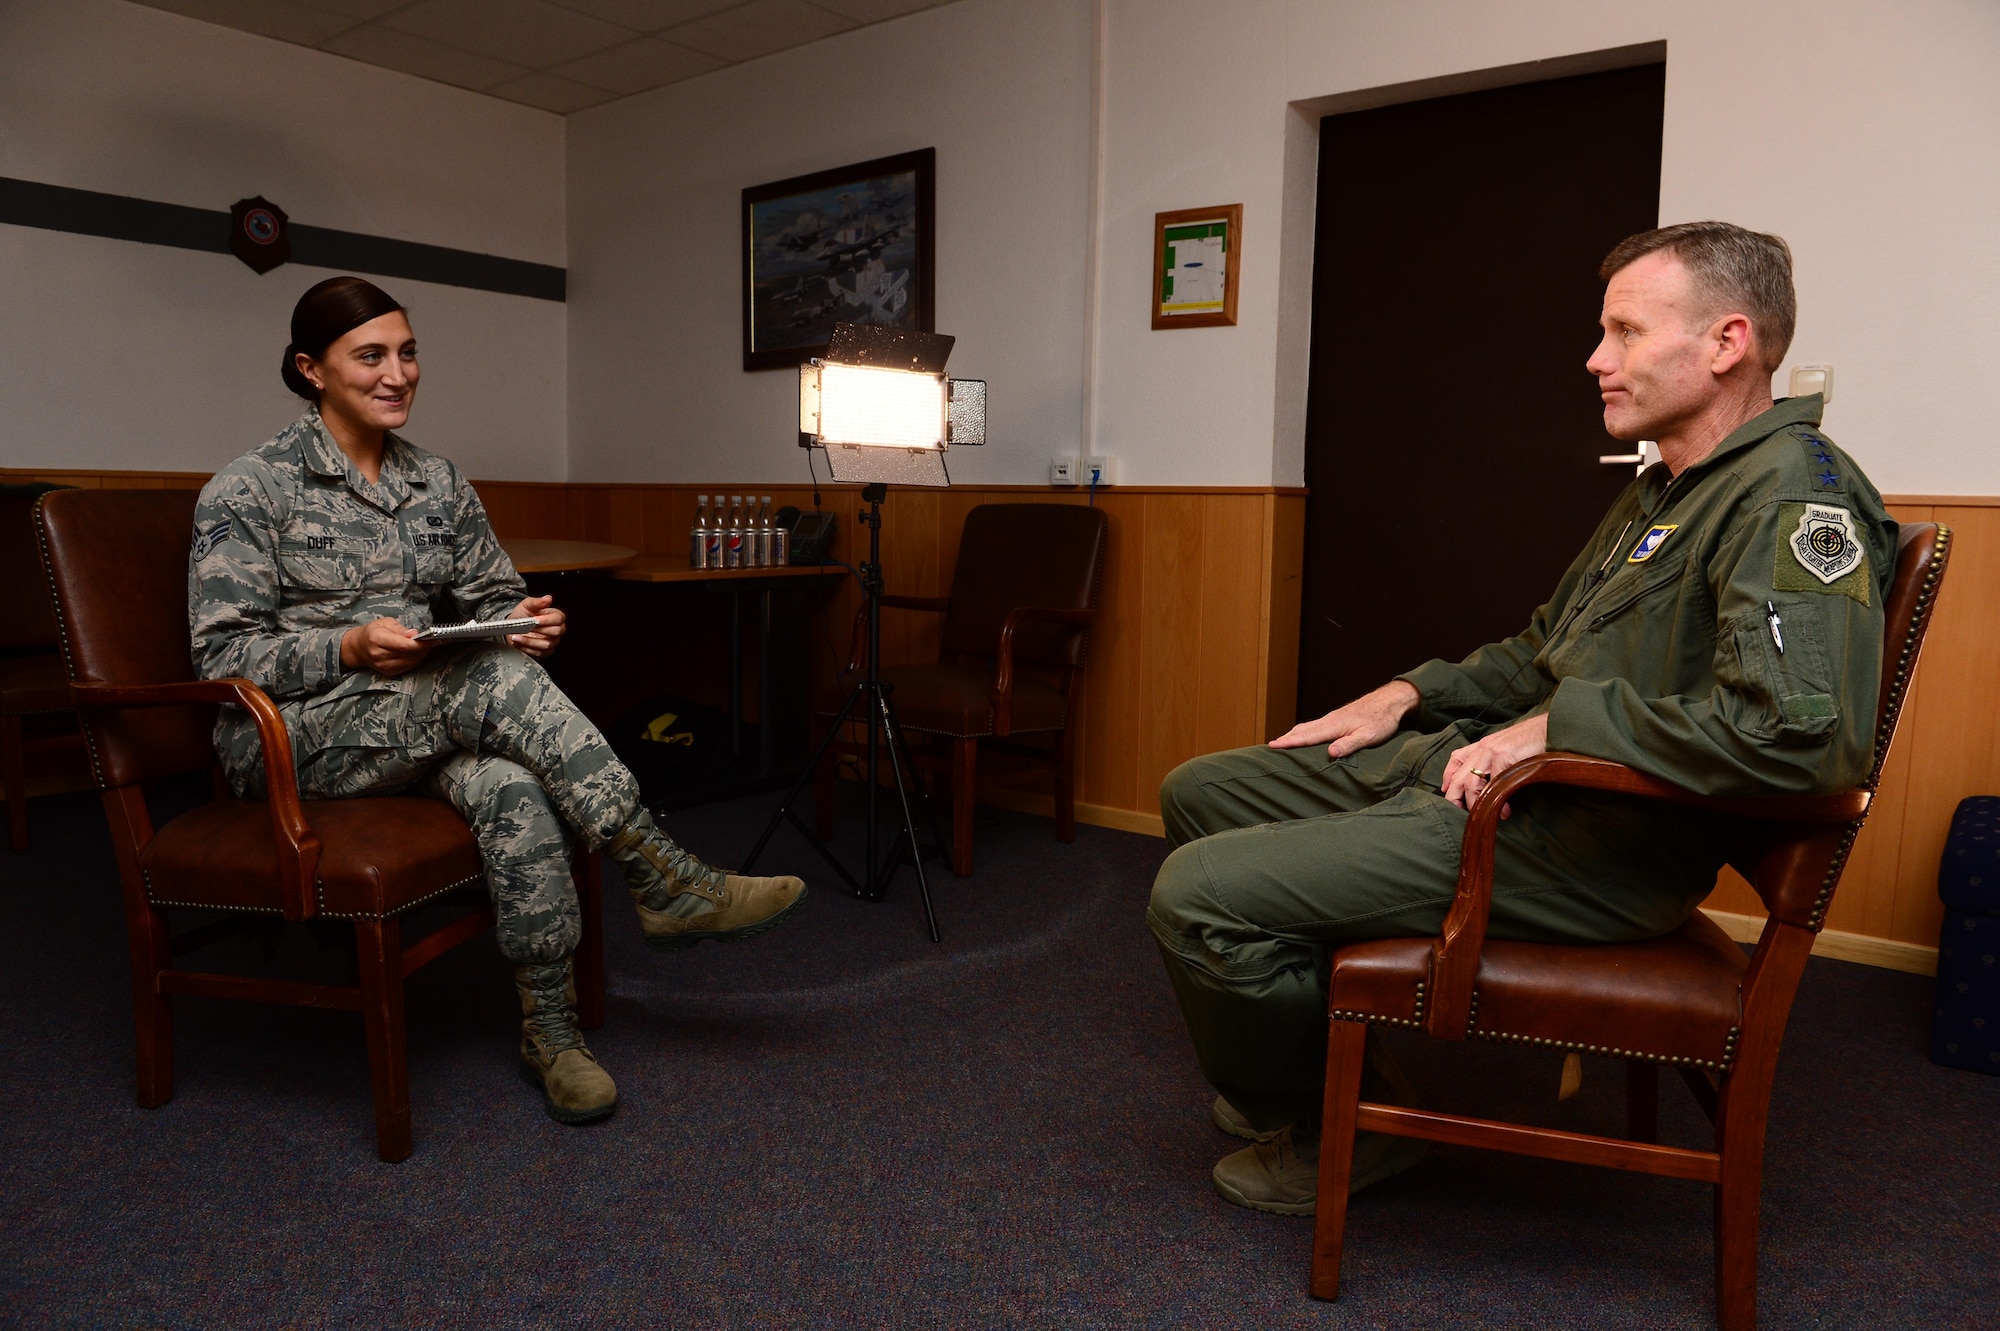 Gen. Tod D. Wolters, U.S. Air Forces in Europe and Air Forces Africa commander, right, listens to a question by Senior Airman Emma Duff, American Forces Network broadcaster, left, during his visit to Spangdahlem Air Base, Germany, Oct. 6, 2016. Wolters made his first visit to Spangdahlem since assuming command in August 2016, speaking to Airmen on the importance and uniqueness of their mission priorities. (U.S. Air Force photo by Senior Airman Joshua R. M. Dewberry)